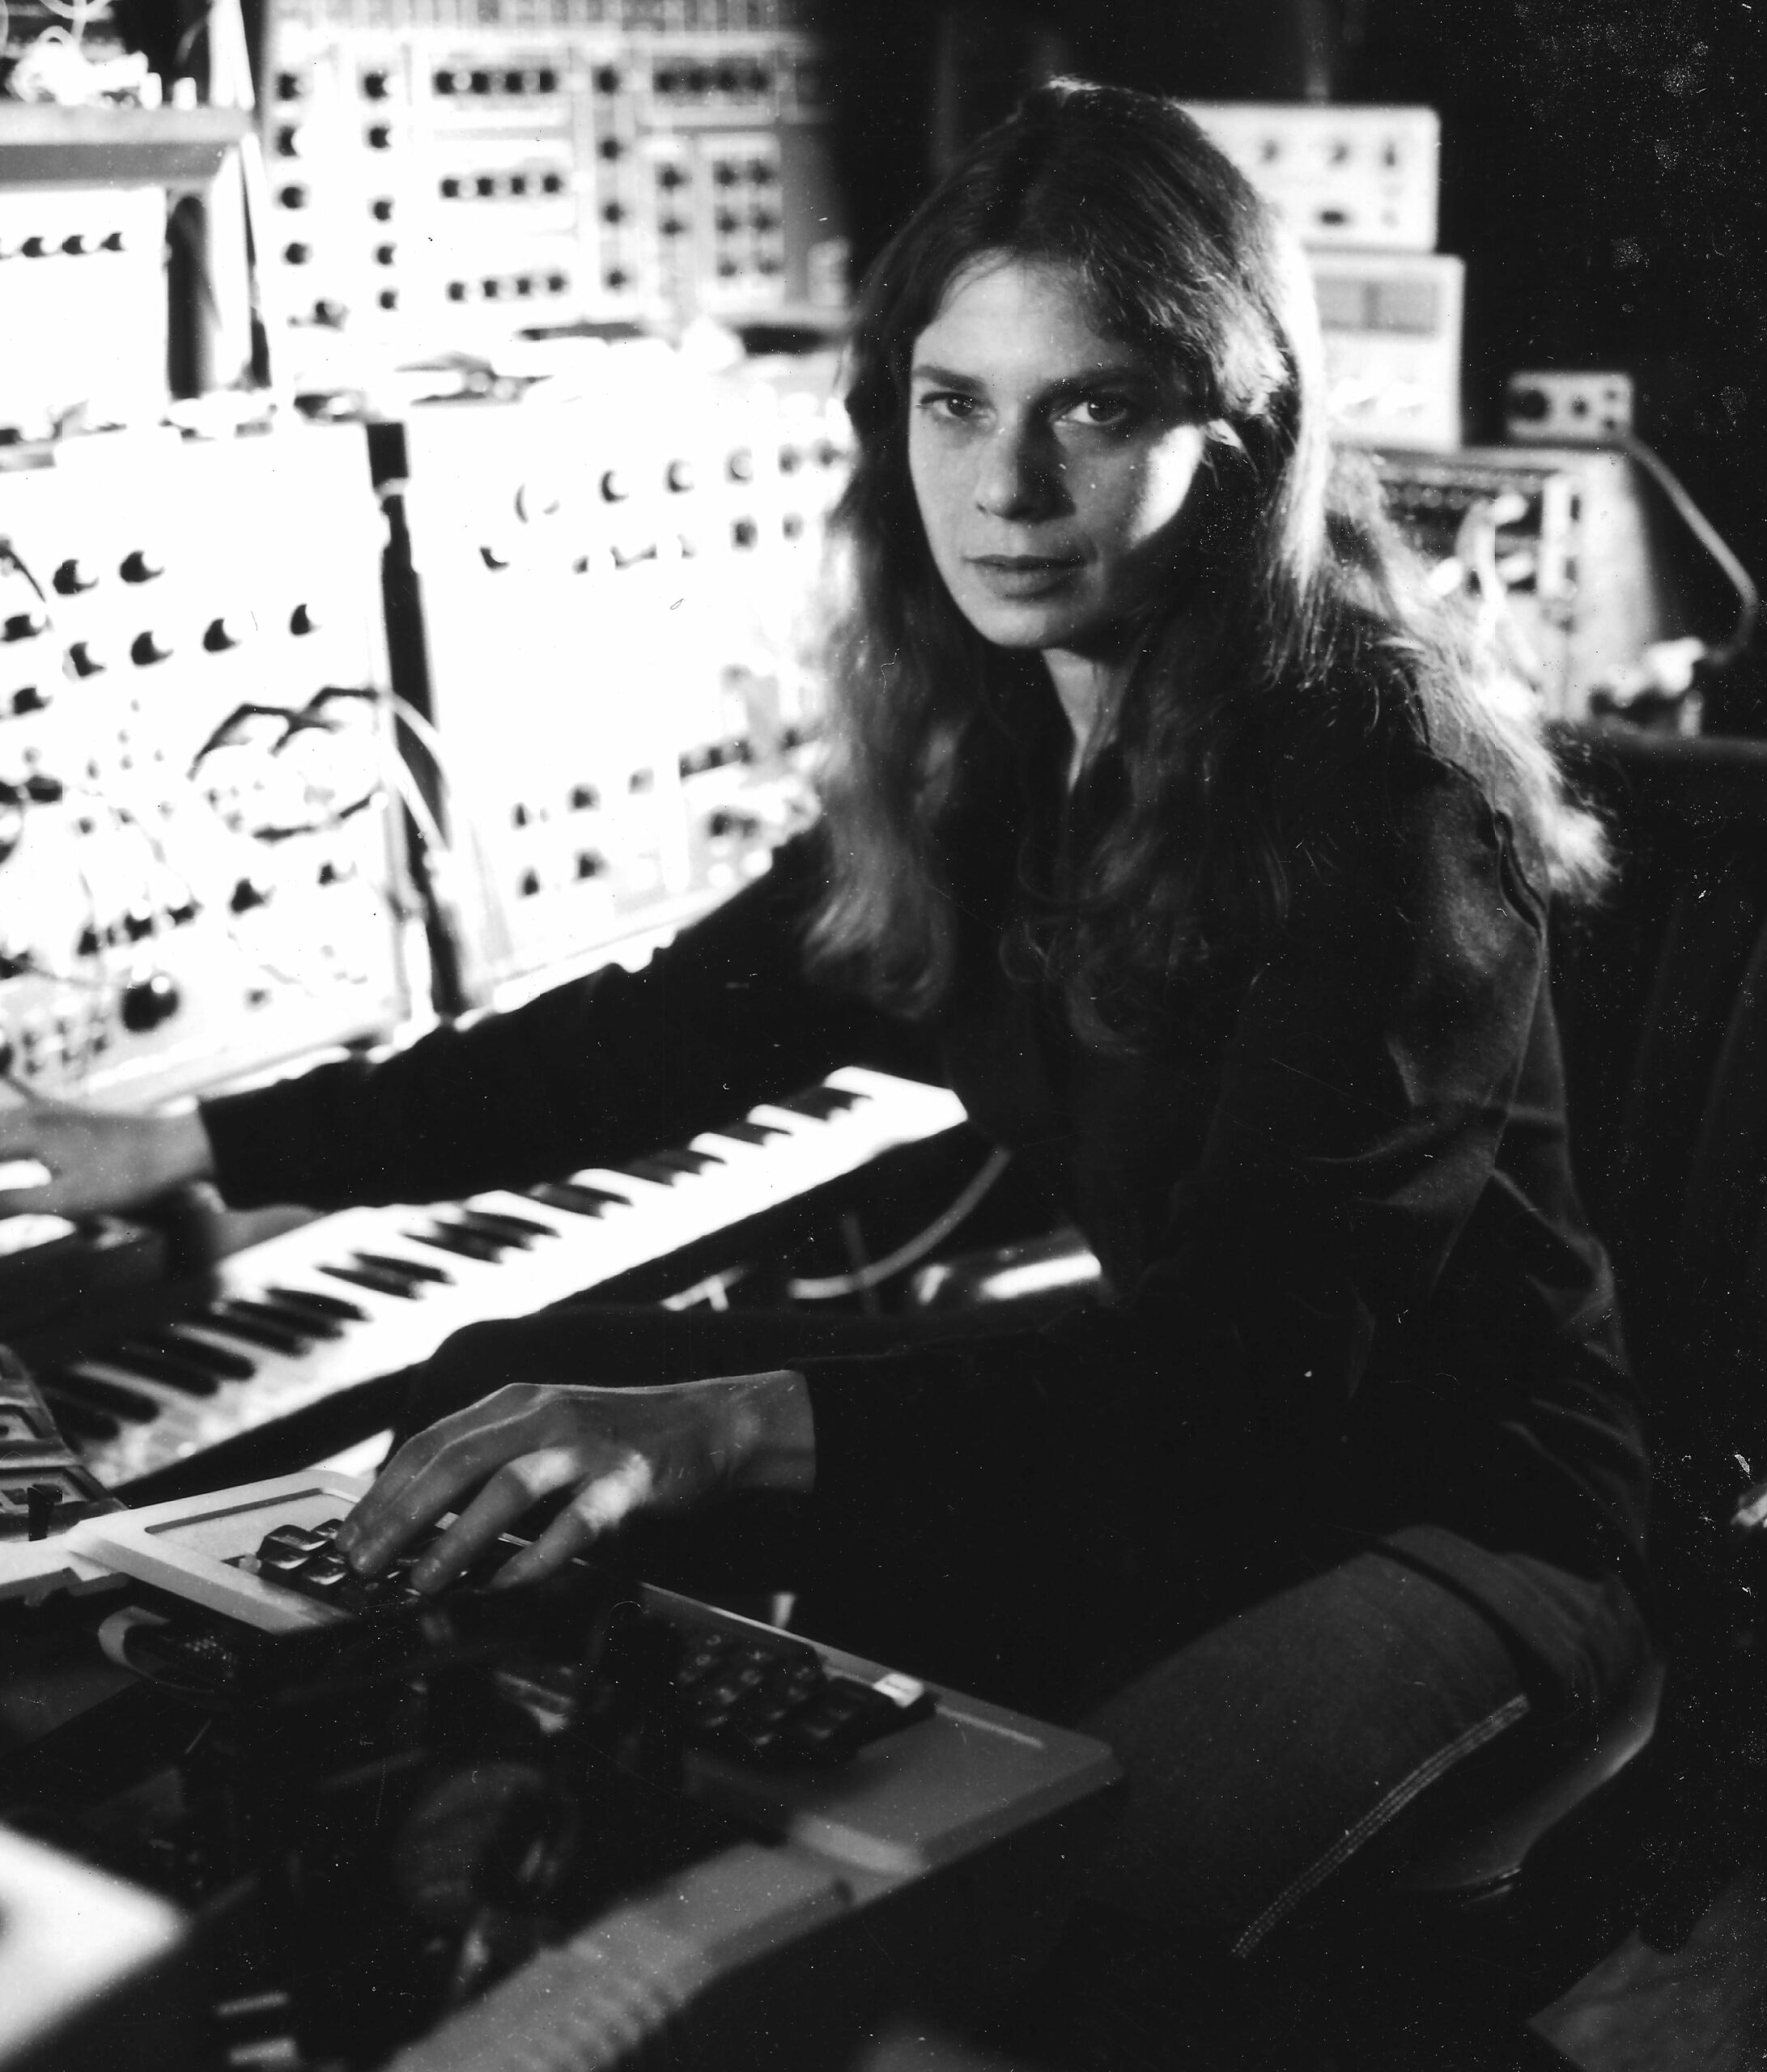 Archival photo of Laurie Speigel in the 70s. She is using a synthesizer.